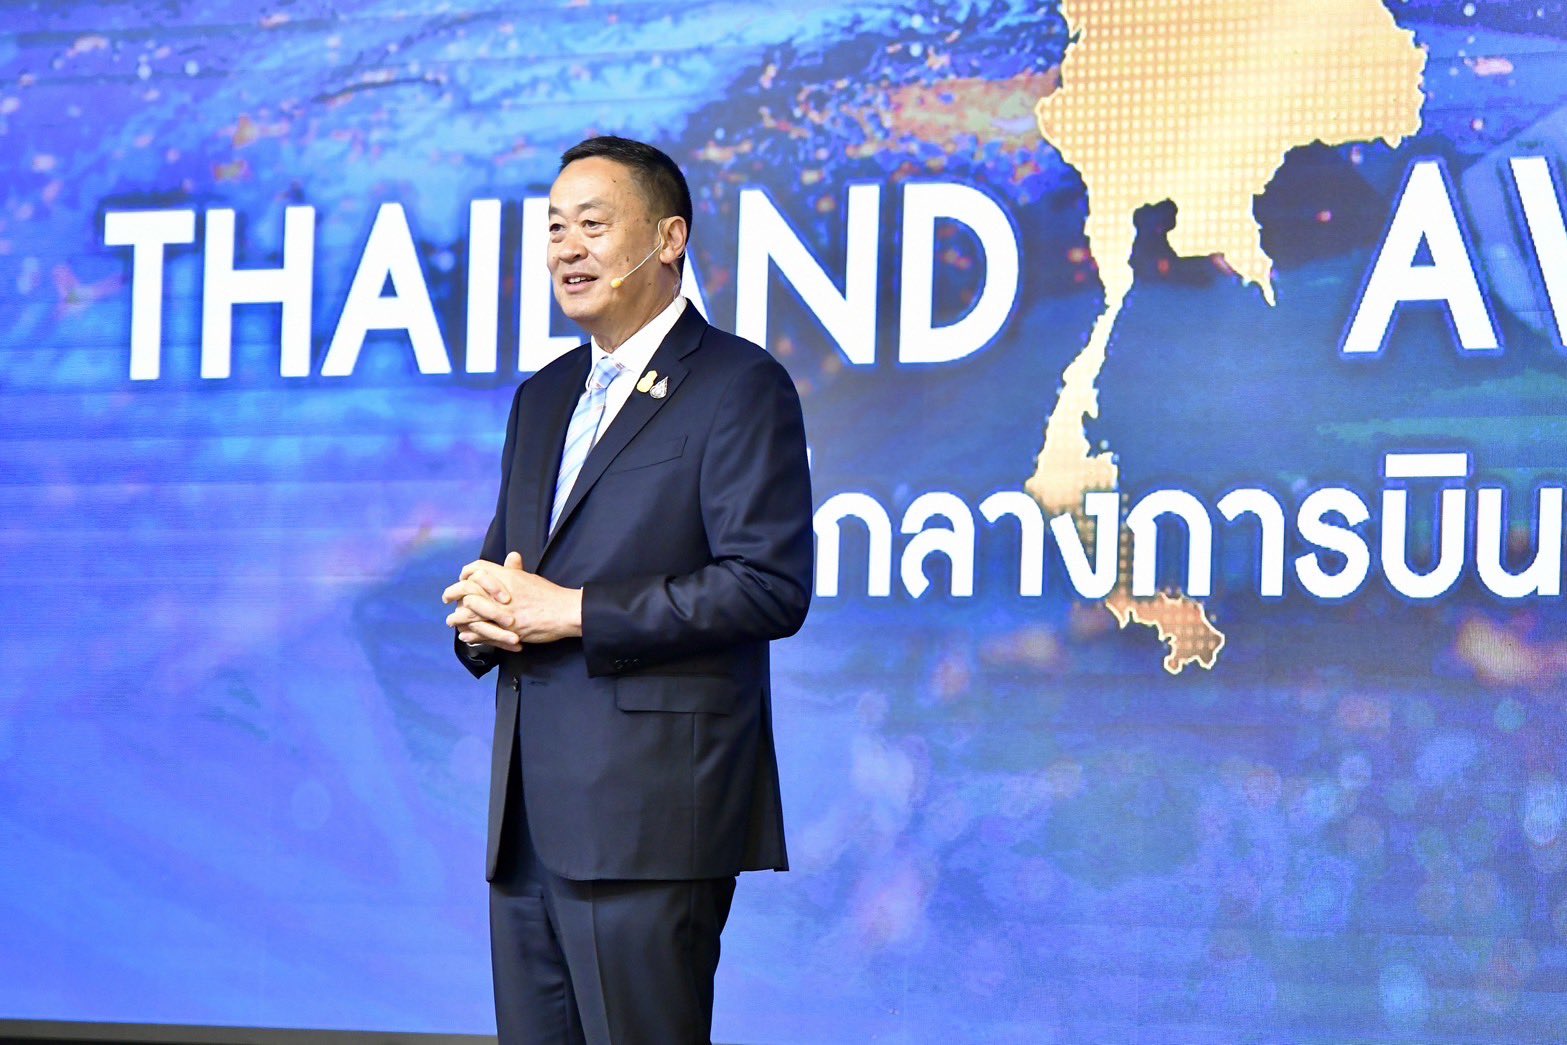 Prime Minister Explains the Vision of Developing Thailand as a Top Aviation Hub